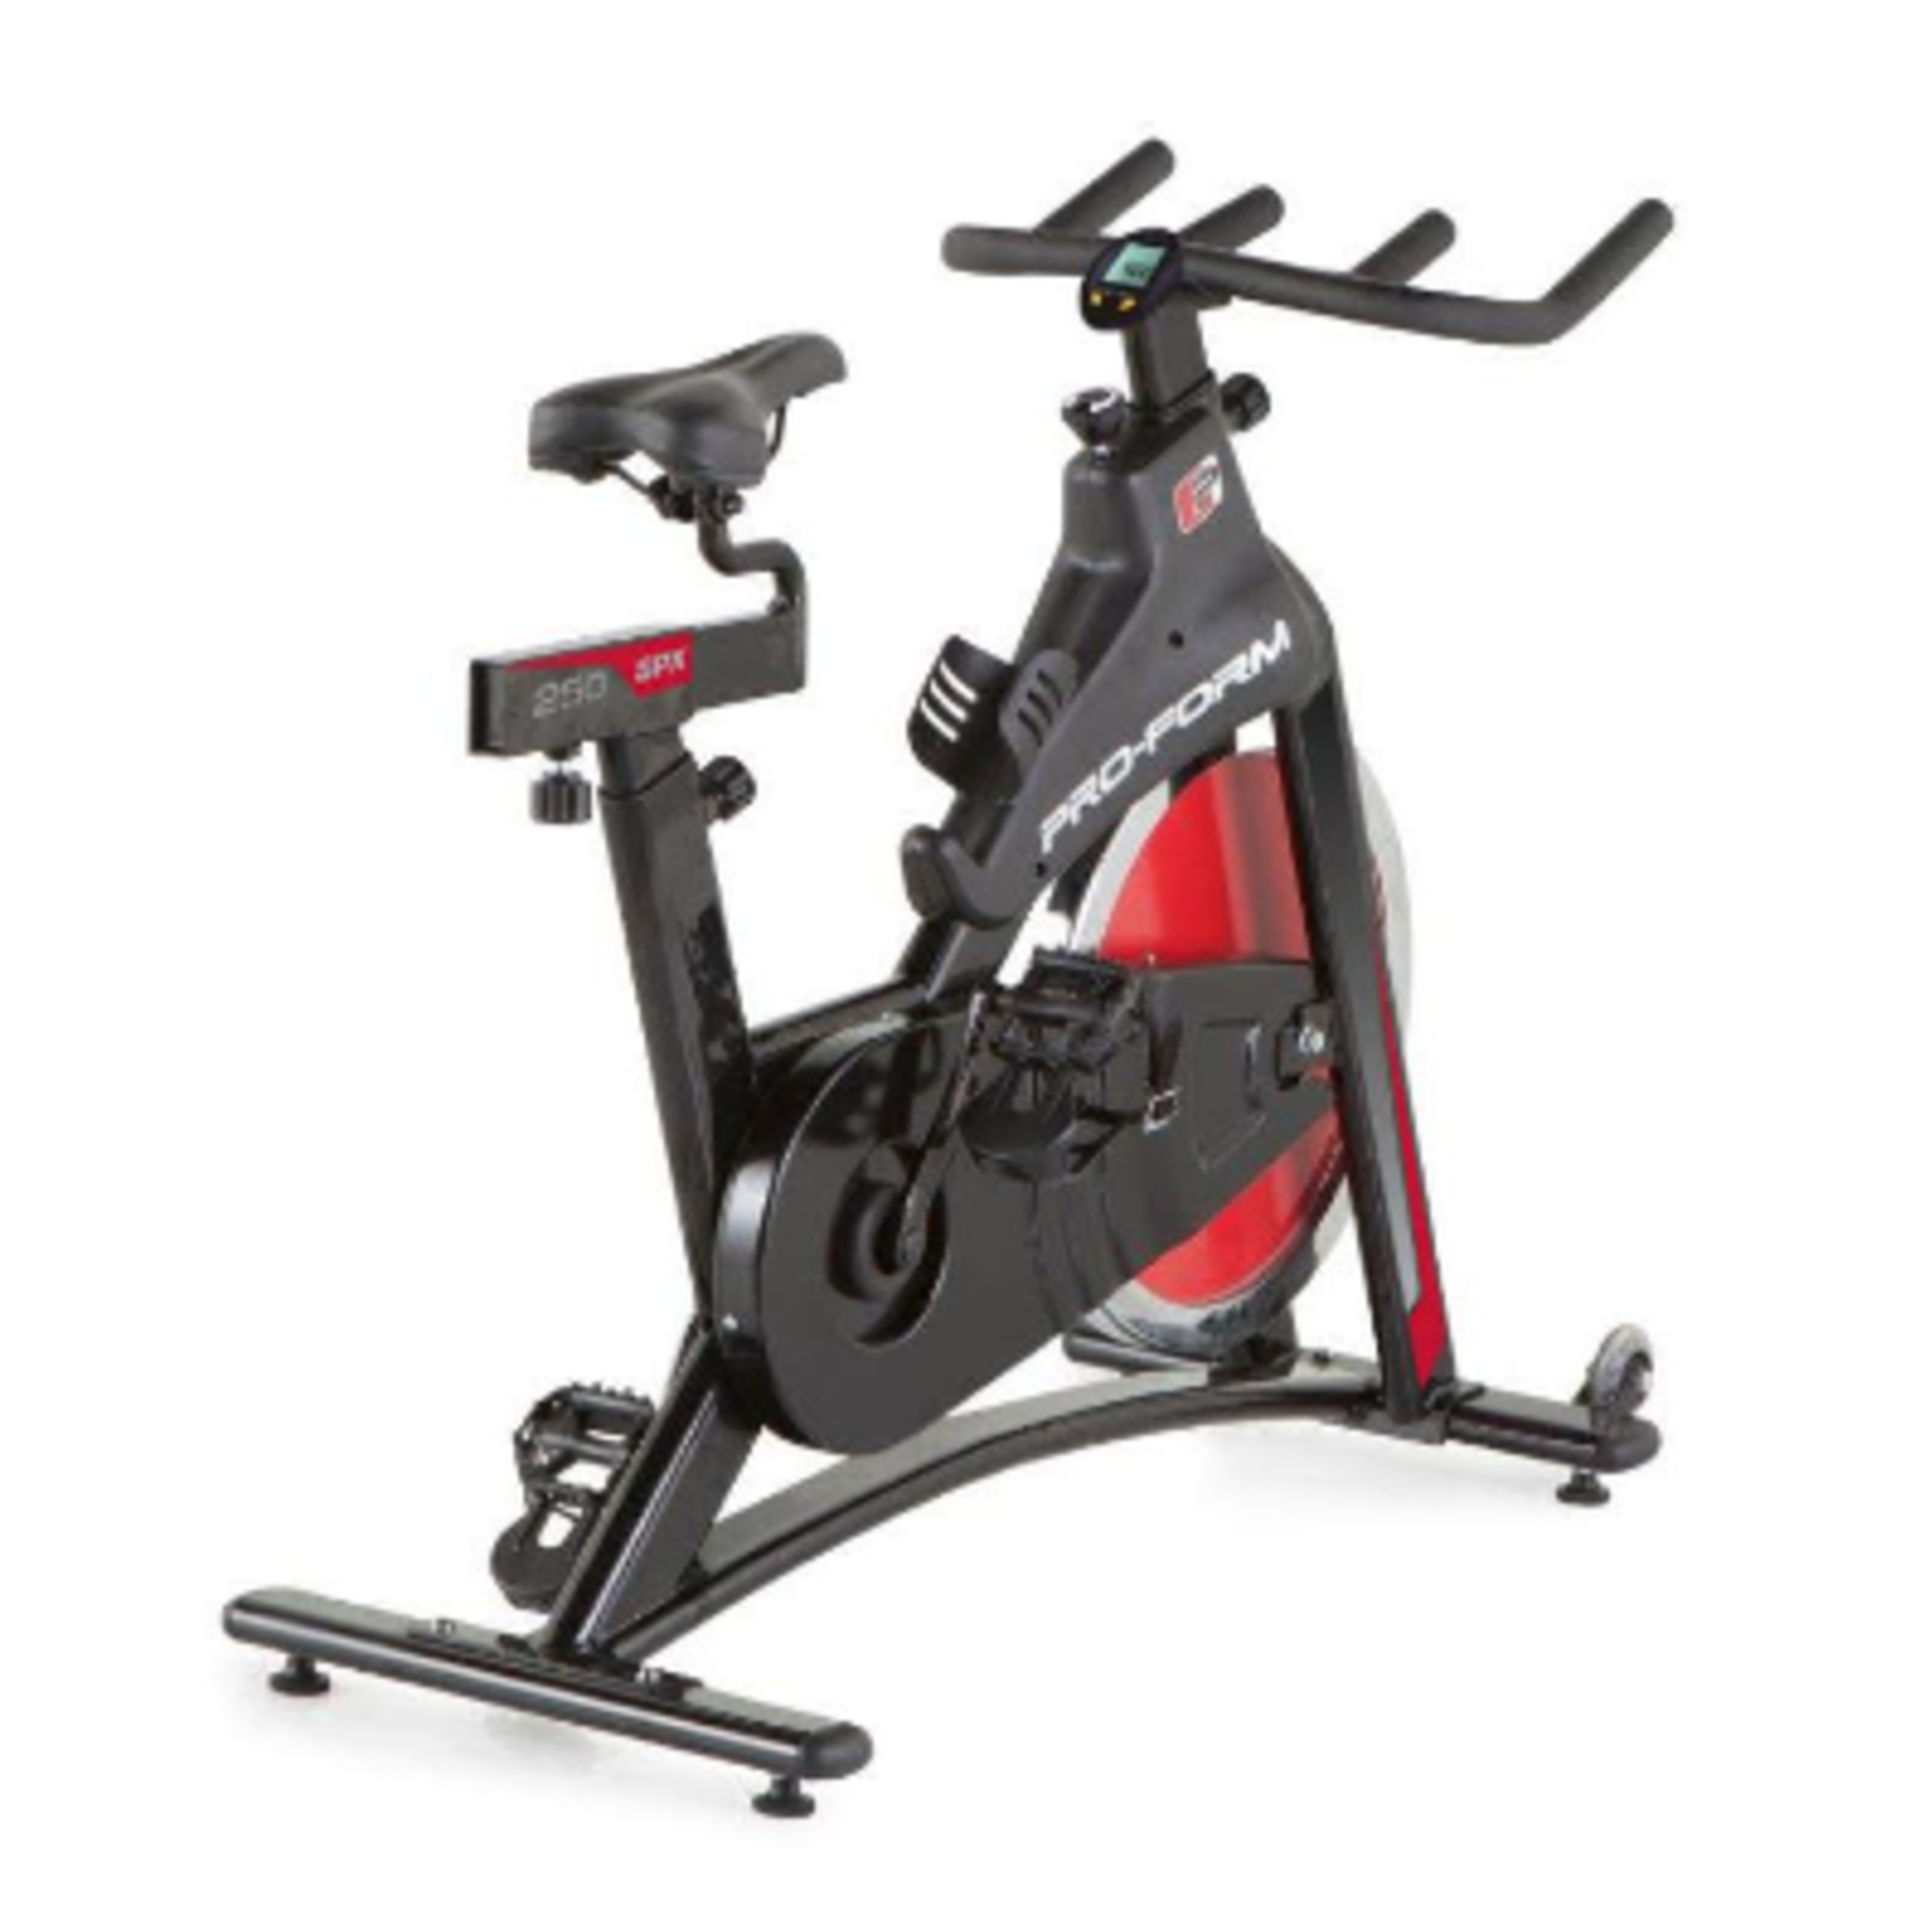 Pro-Form - SPX 250 Indoor Cycle Exercise Bike - Used Condition, Still Very Usable. RRP £